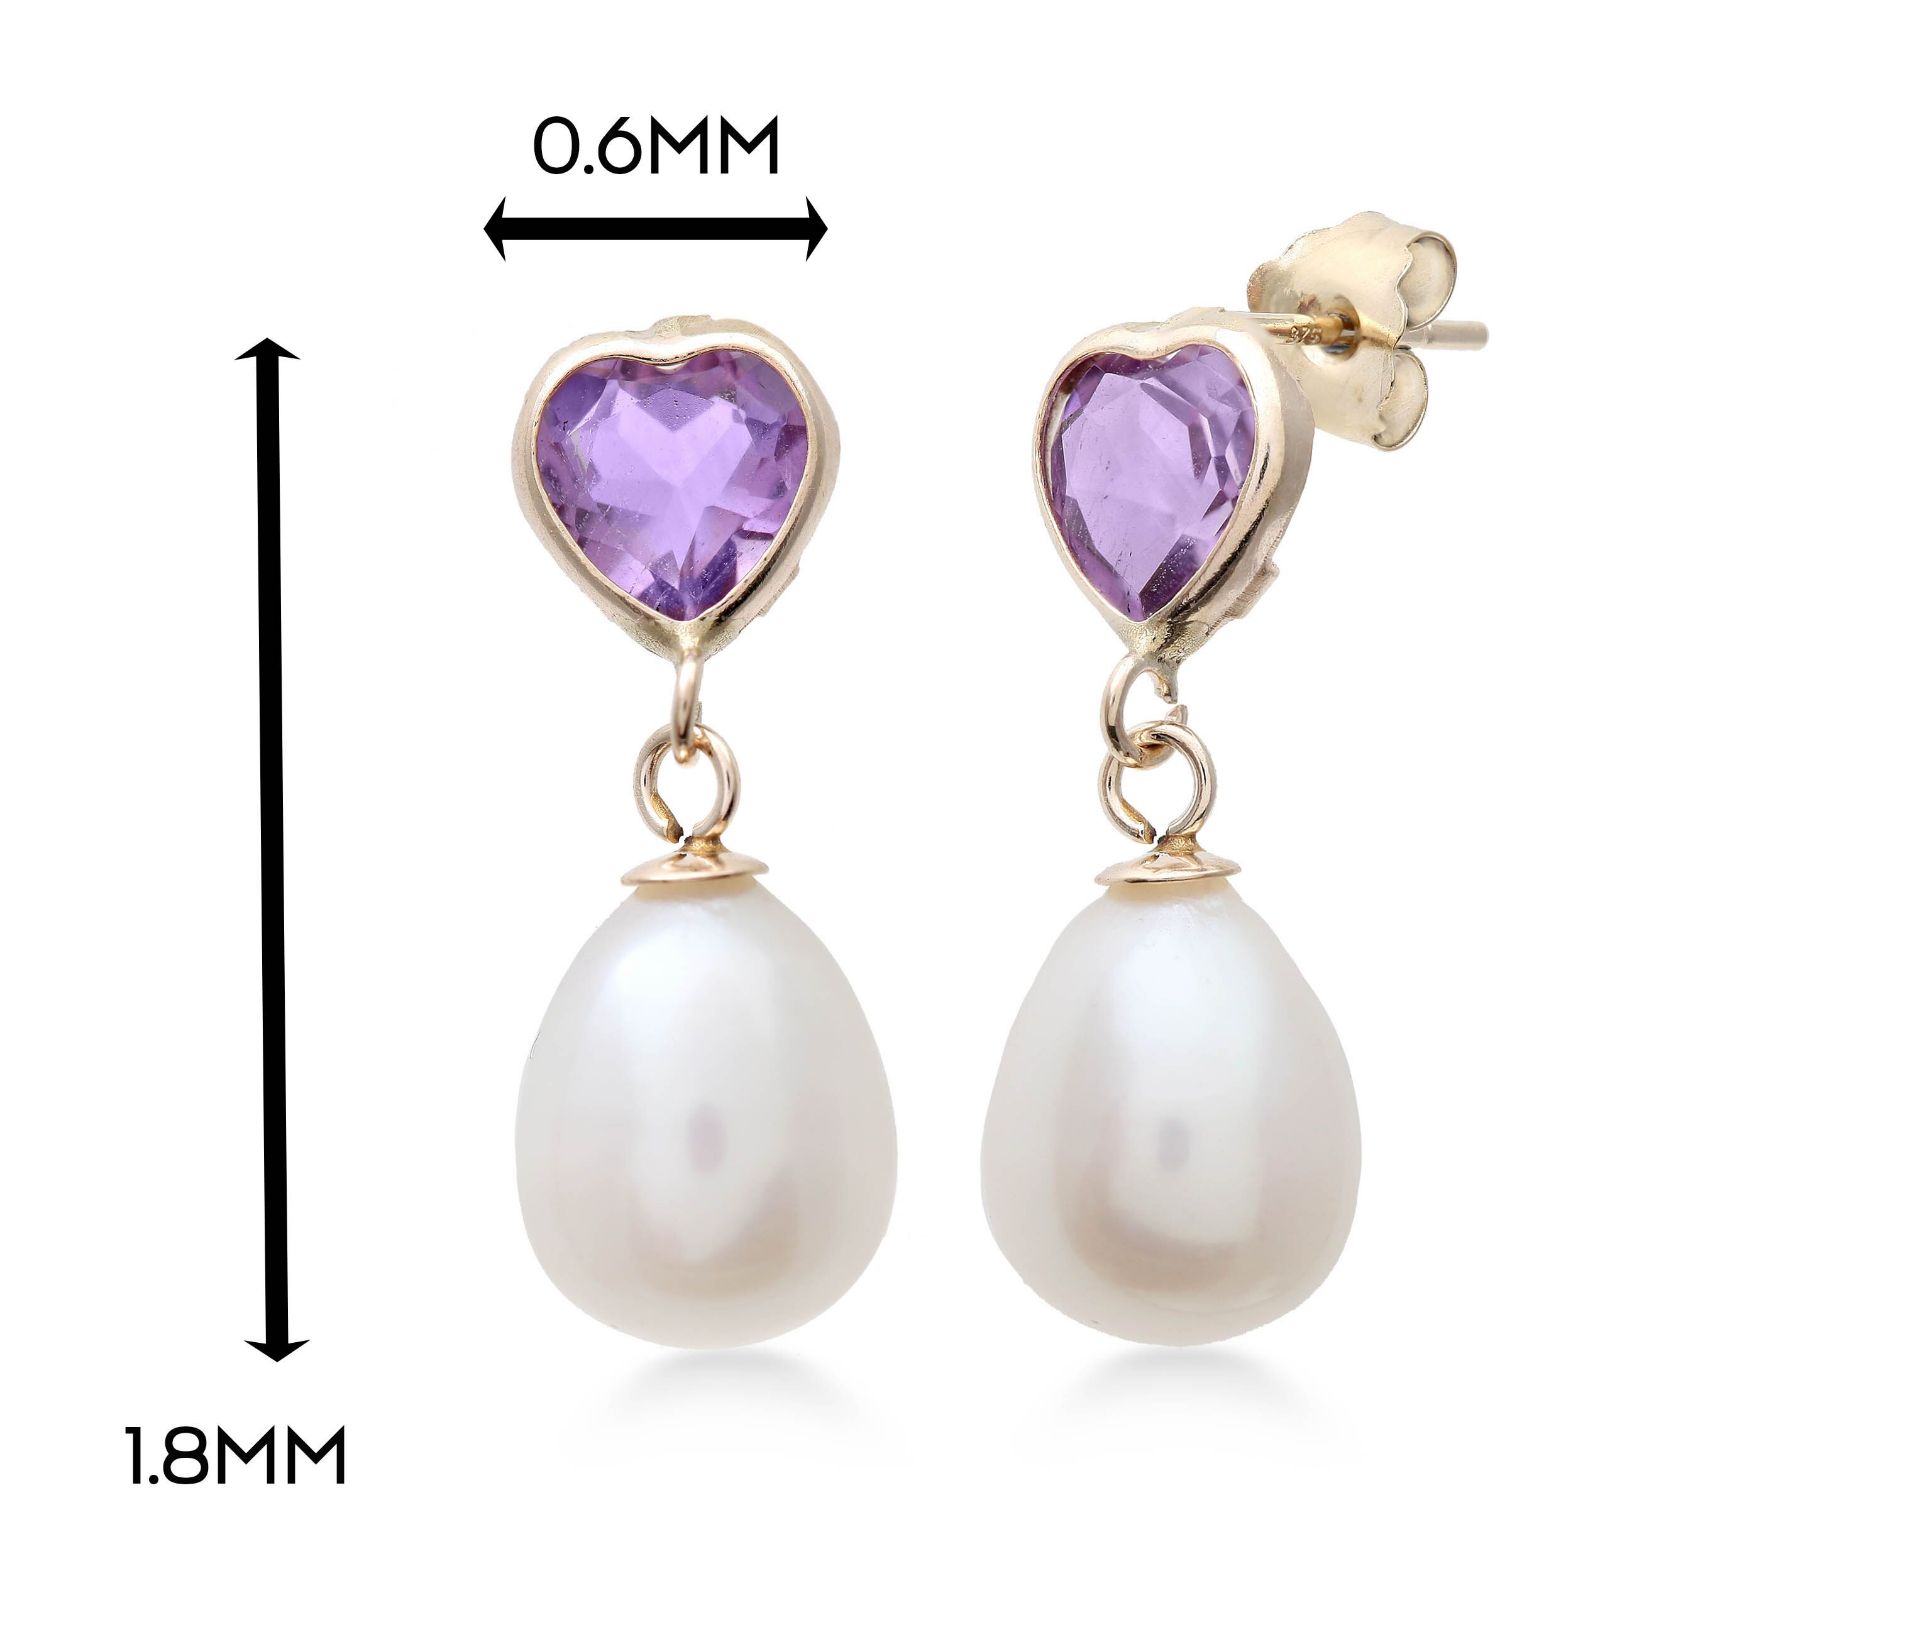 Heart Cut Amethyst And Pearl Earrings, Metal 9ct Yellow Gold, Weight (g) 0.8, RRP £119.99 (E34110- - Image 2 of 4